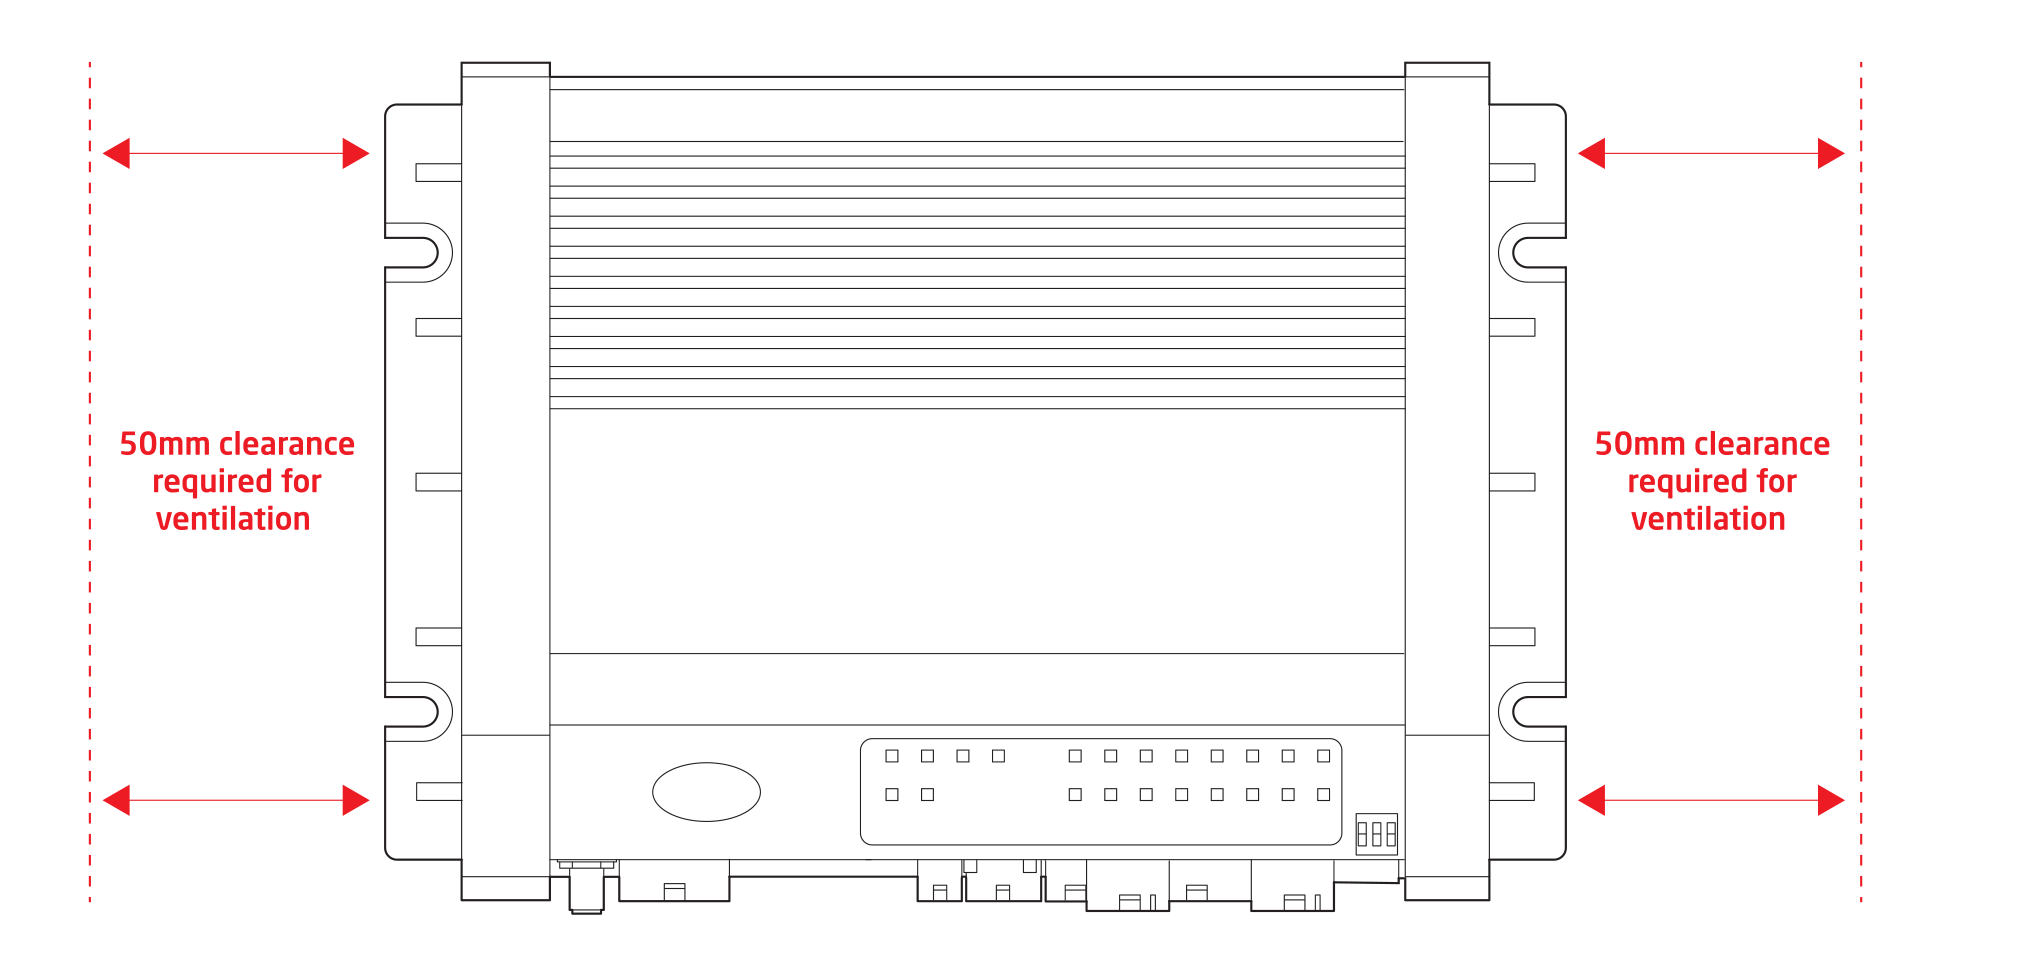 MCS-NX8 Ventilation Clearance Dimensions showing 50mm clearance requirement each side